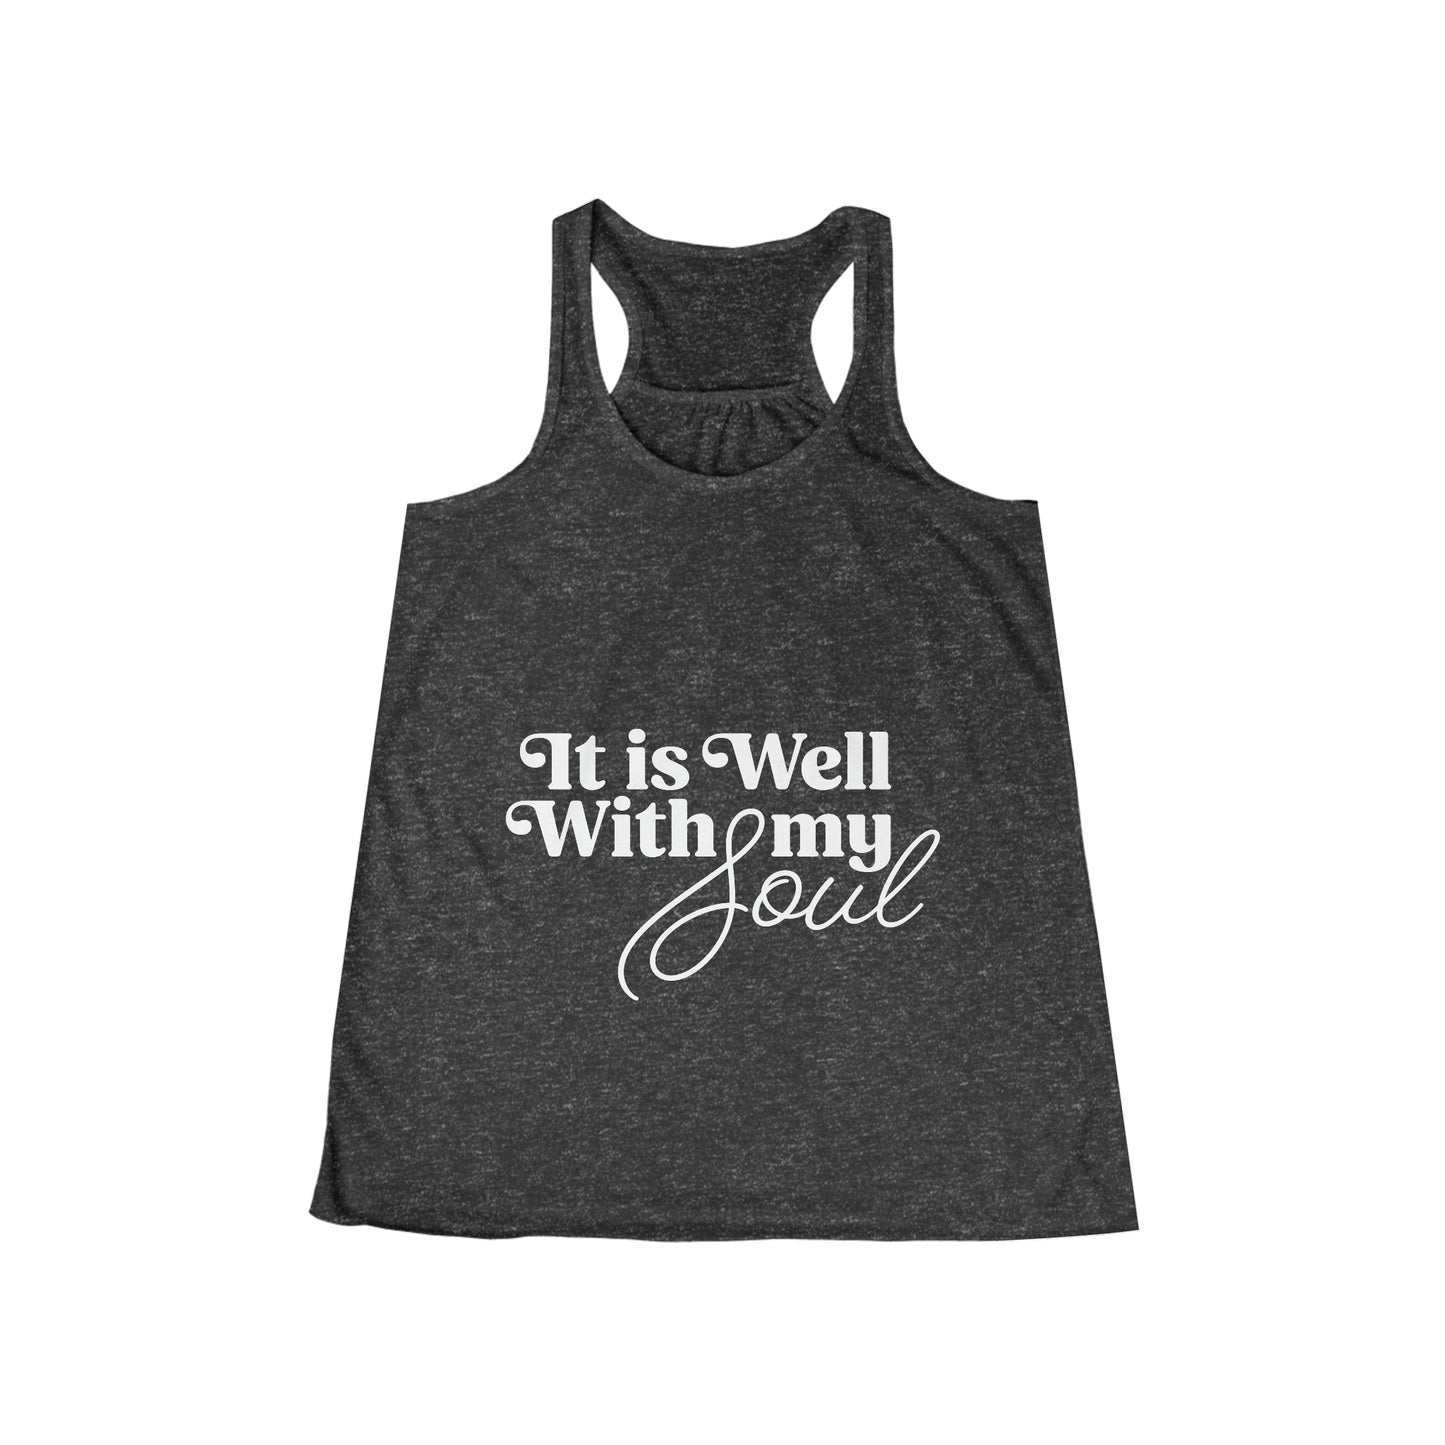 Copy of Well With my Soul Tank - A